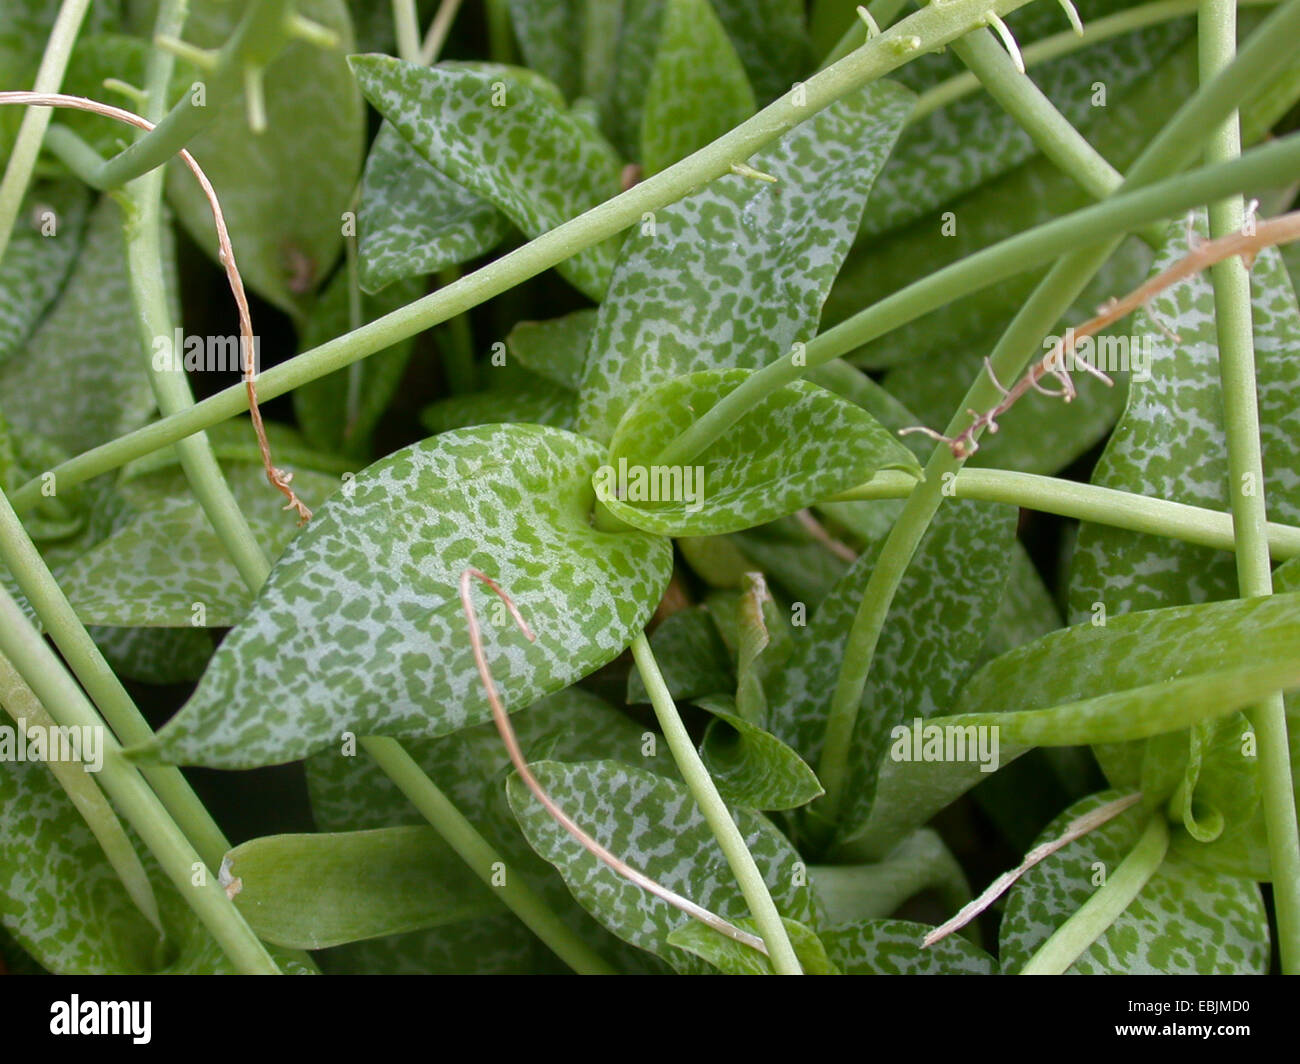 Silver Squill, Violet Squill, Leopard Lily (Ledebouria socialis, Scilla violacea), leaves Stock Photo